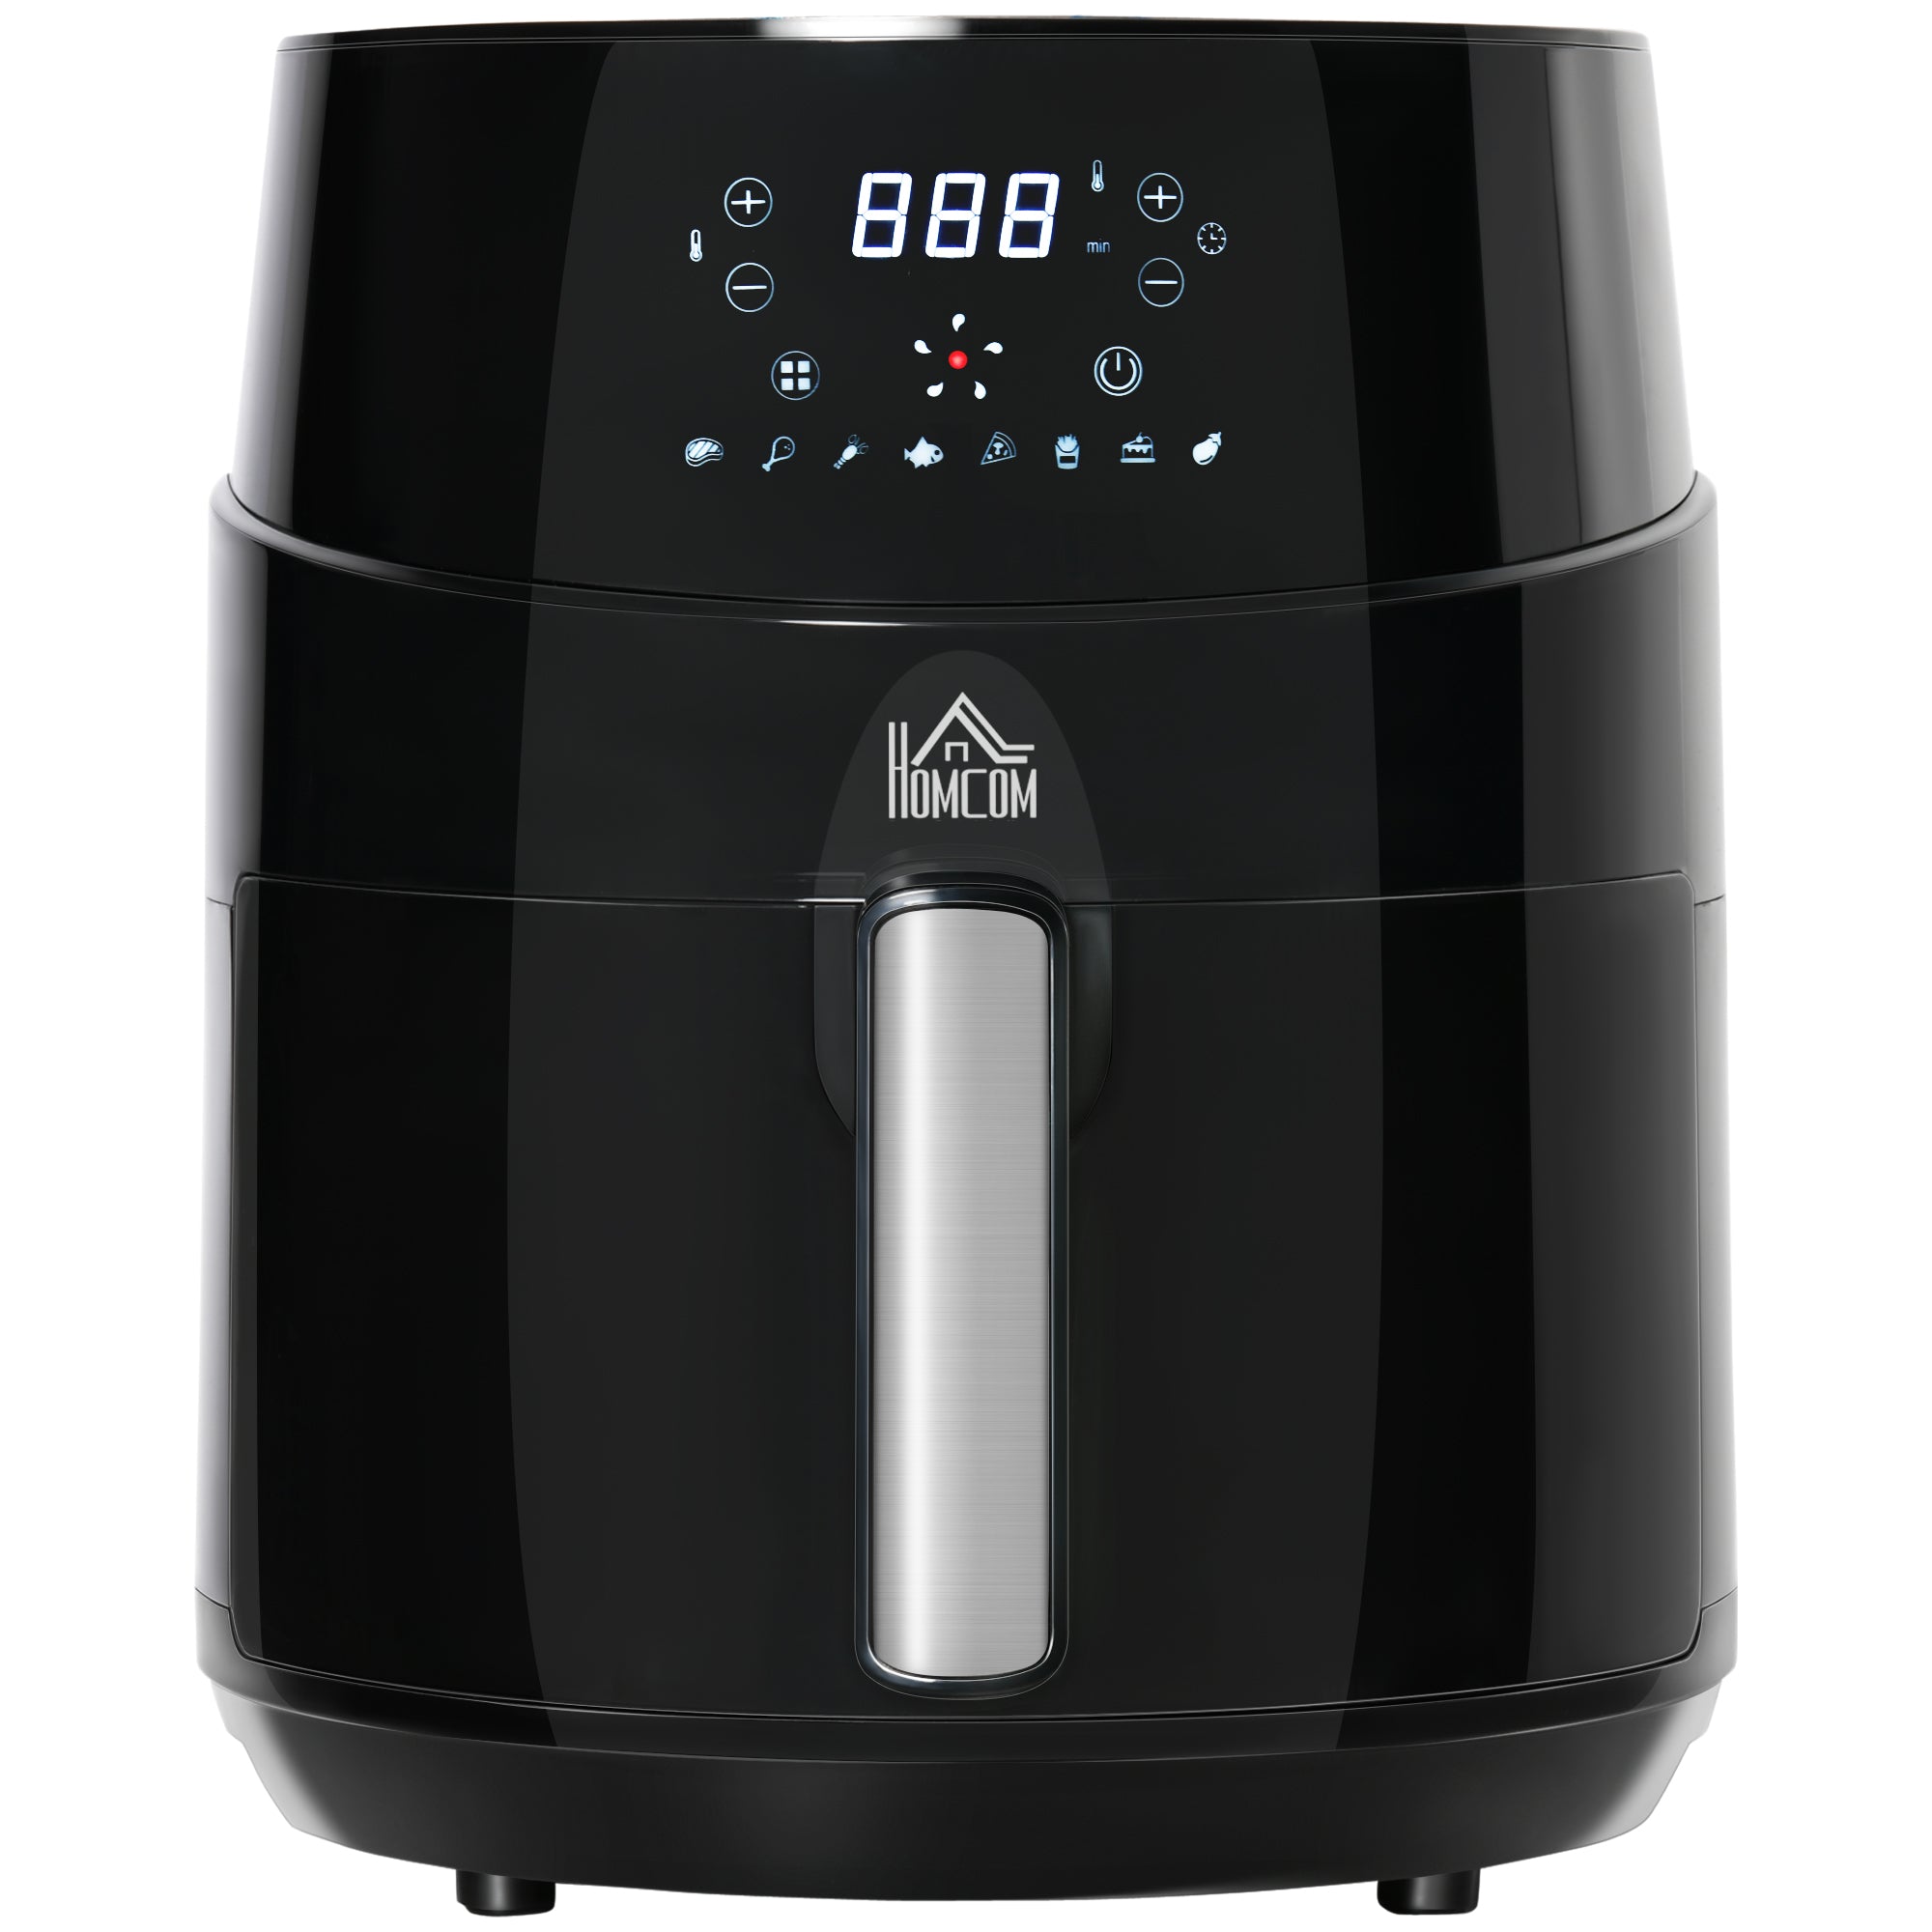 HOMCOM Air Fryer 1500W 4.5L with Digital Display Timer for Low Fat Cooking  | TJ Hughes